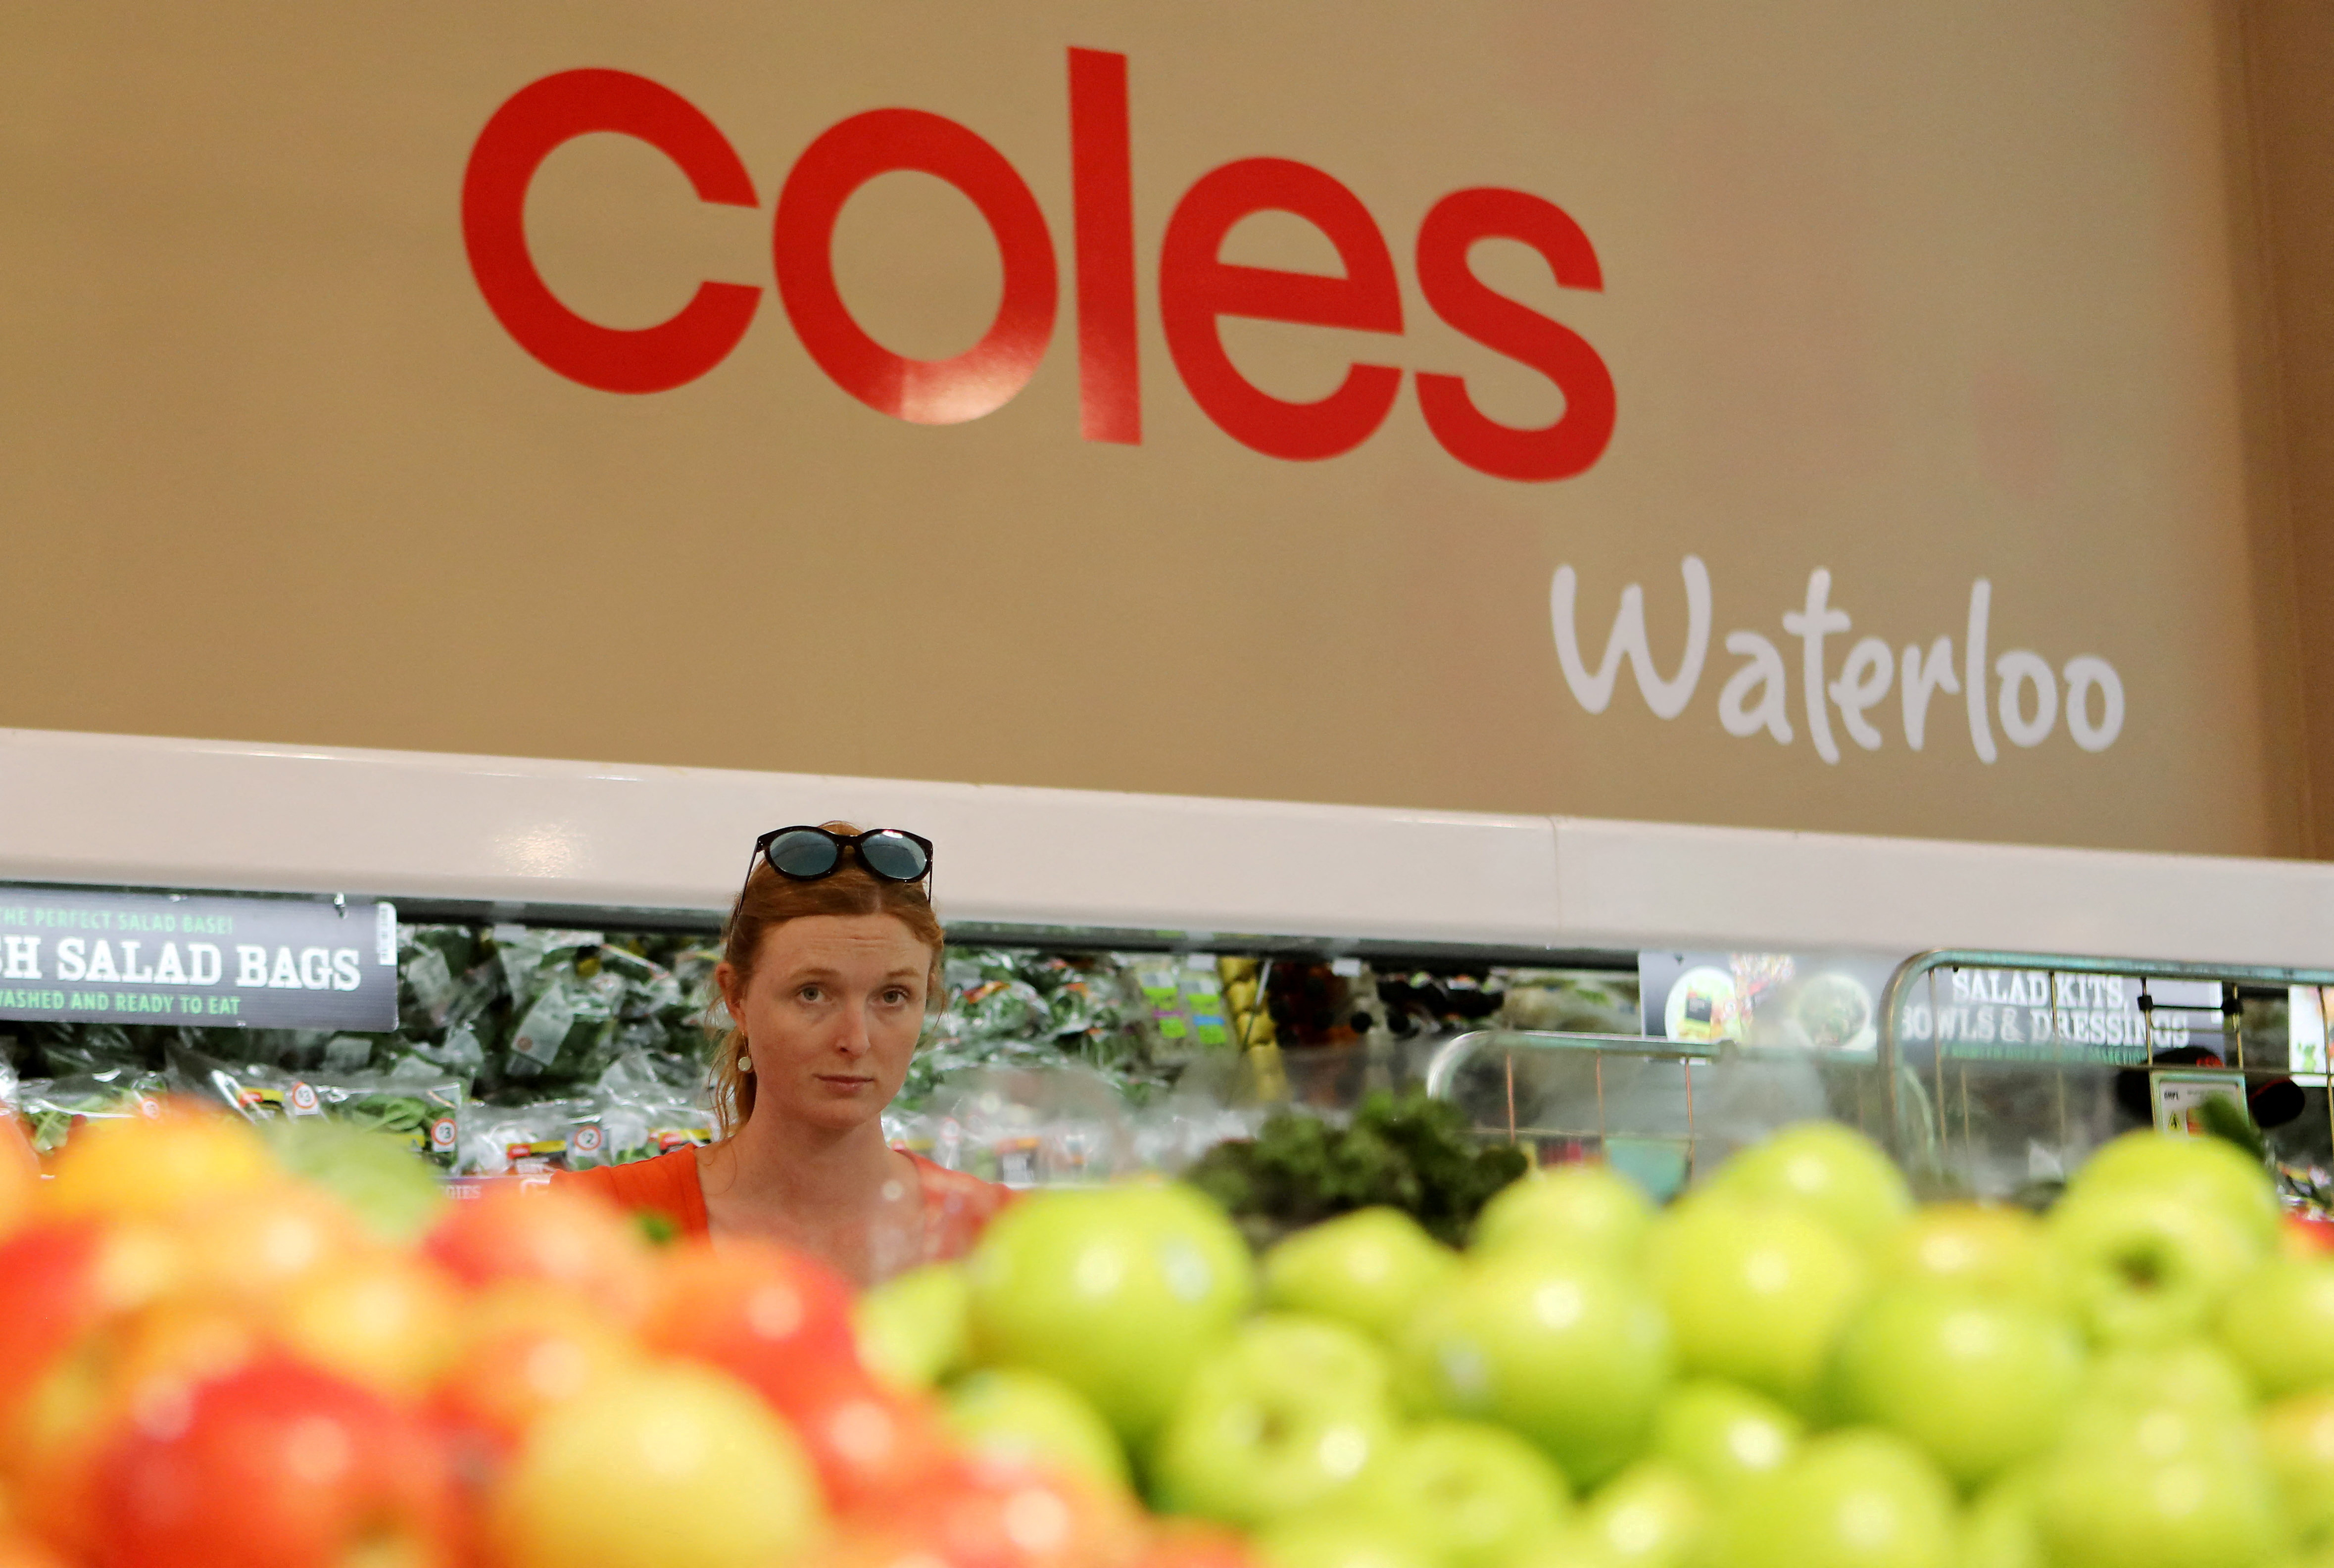 A woman walks in the fruit and vegetables section at a Coles supermarket (main Wesfarmers brand) in Sydney